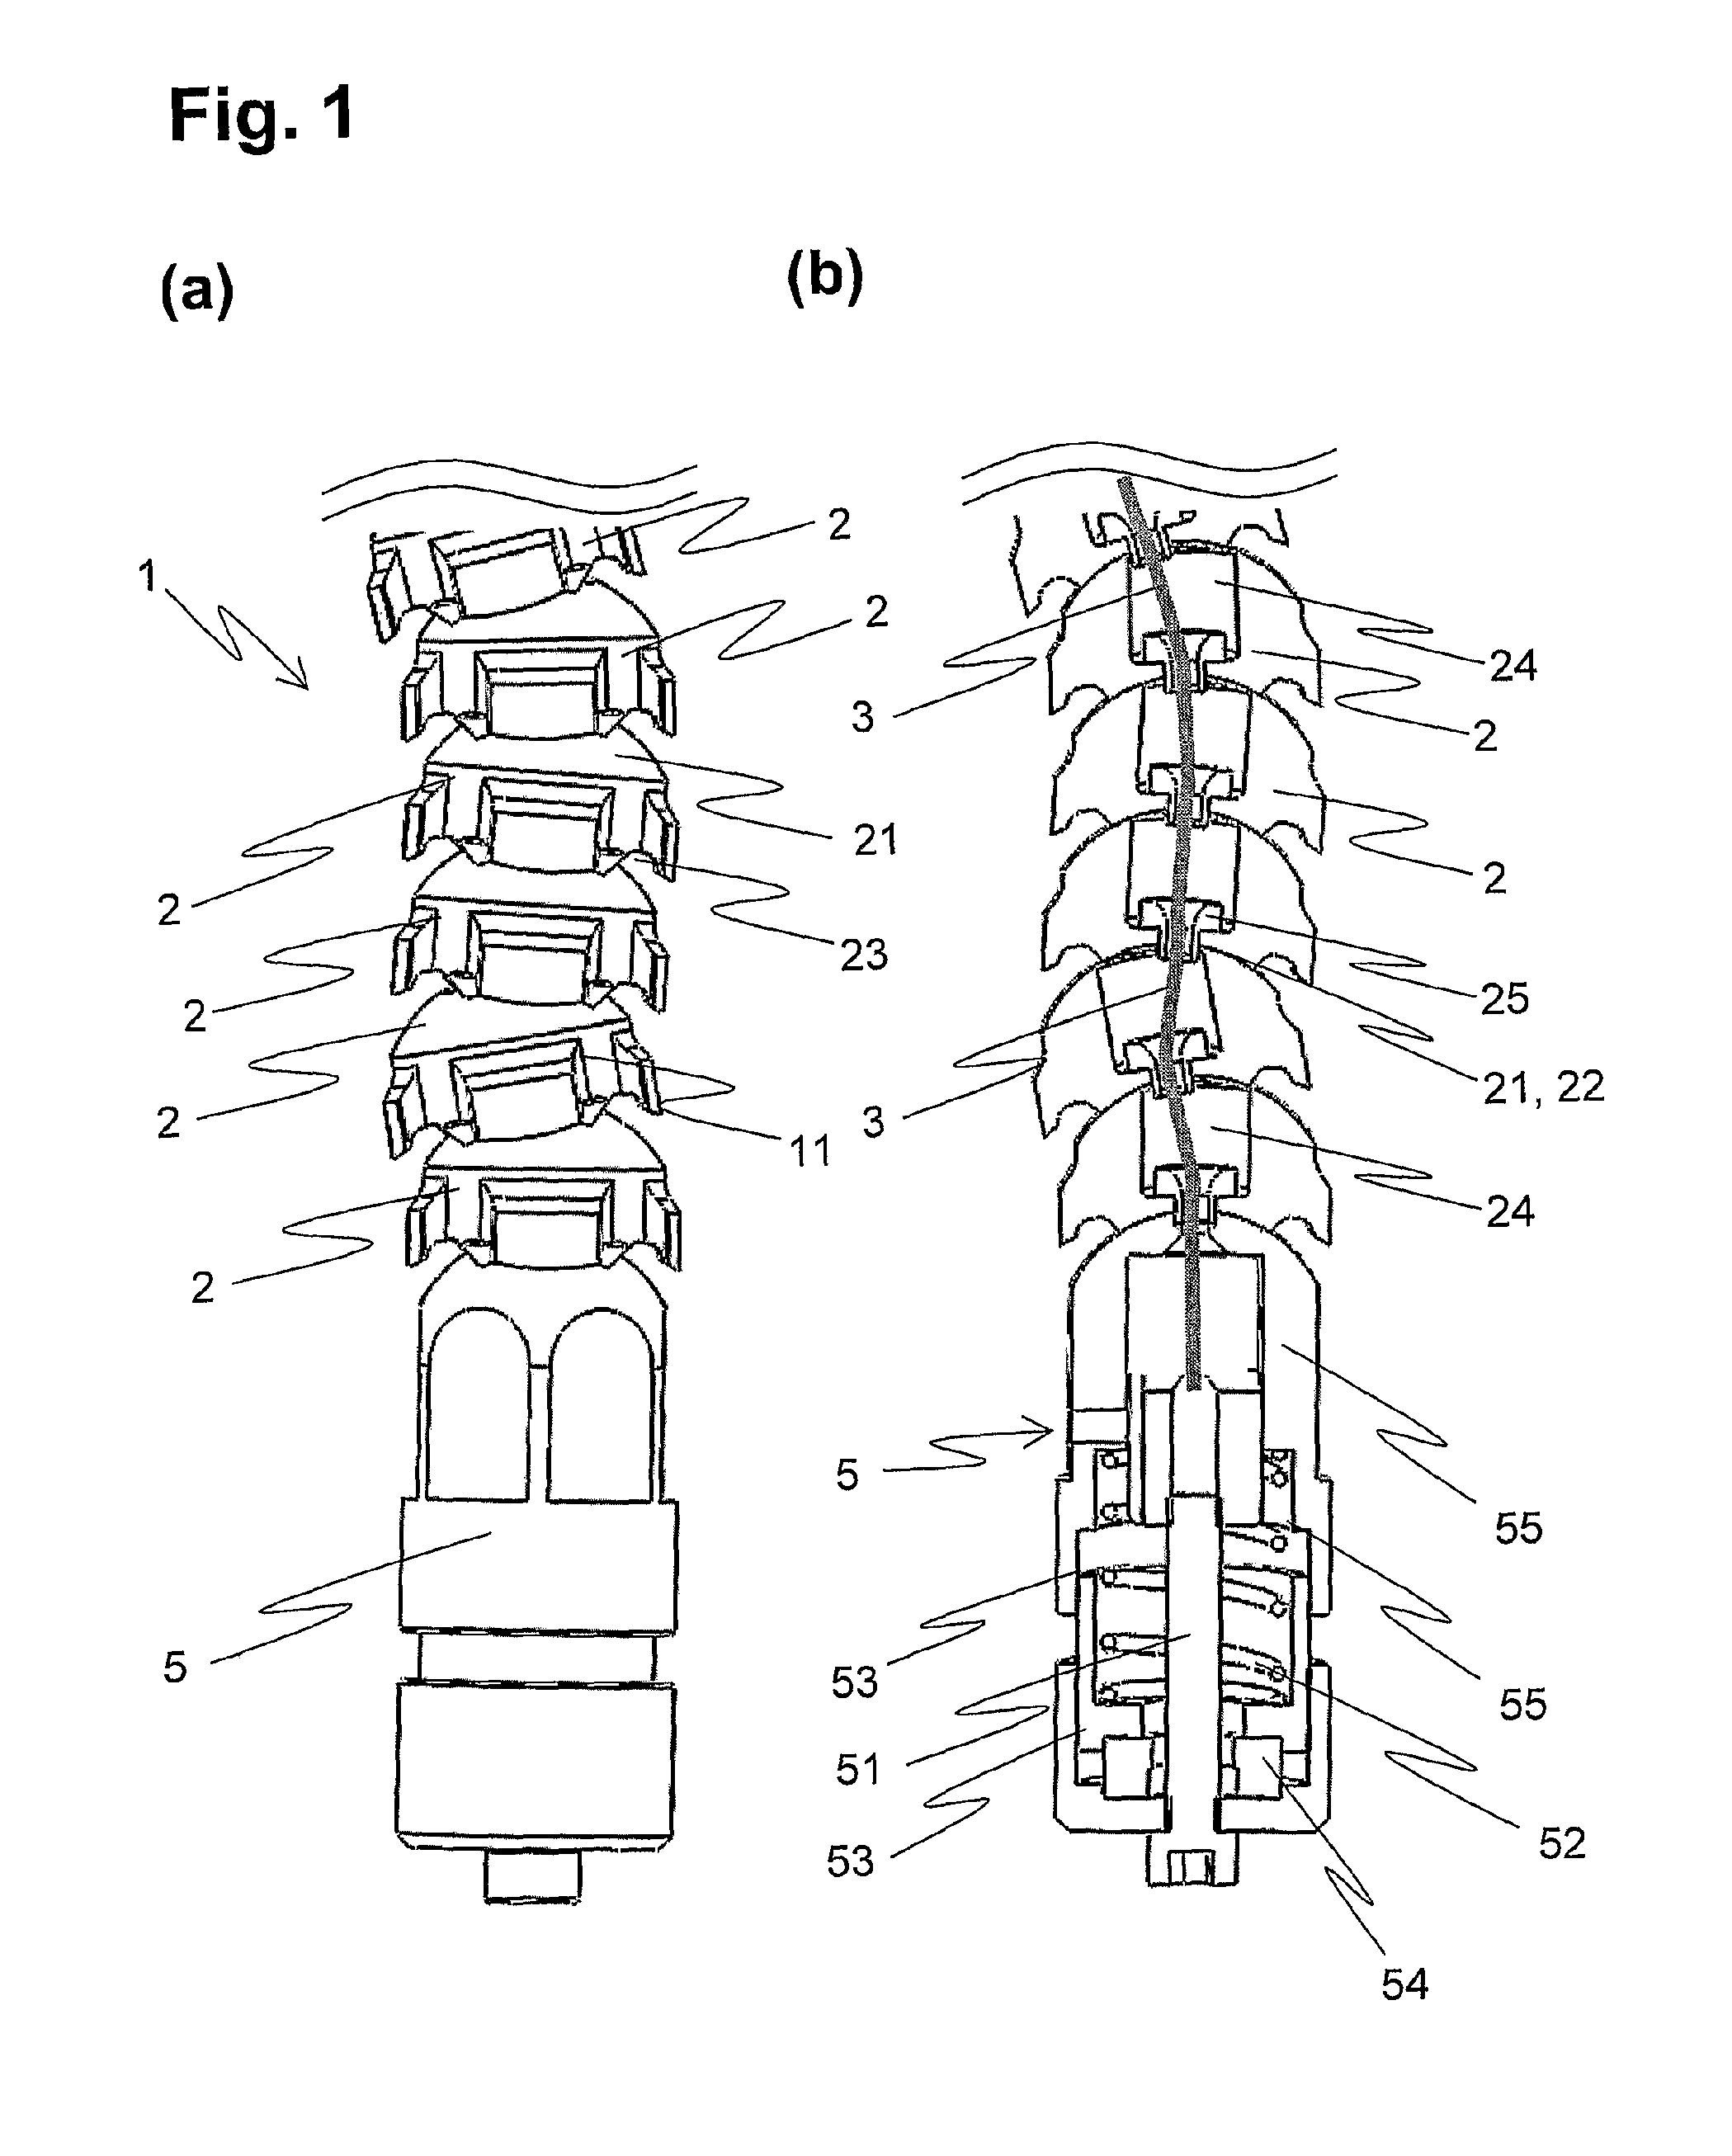 Device for externally fixing bone fractures